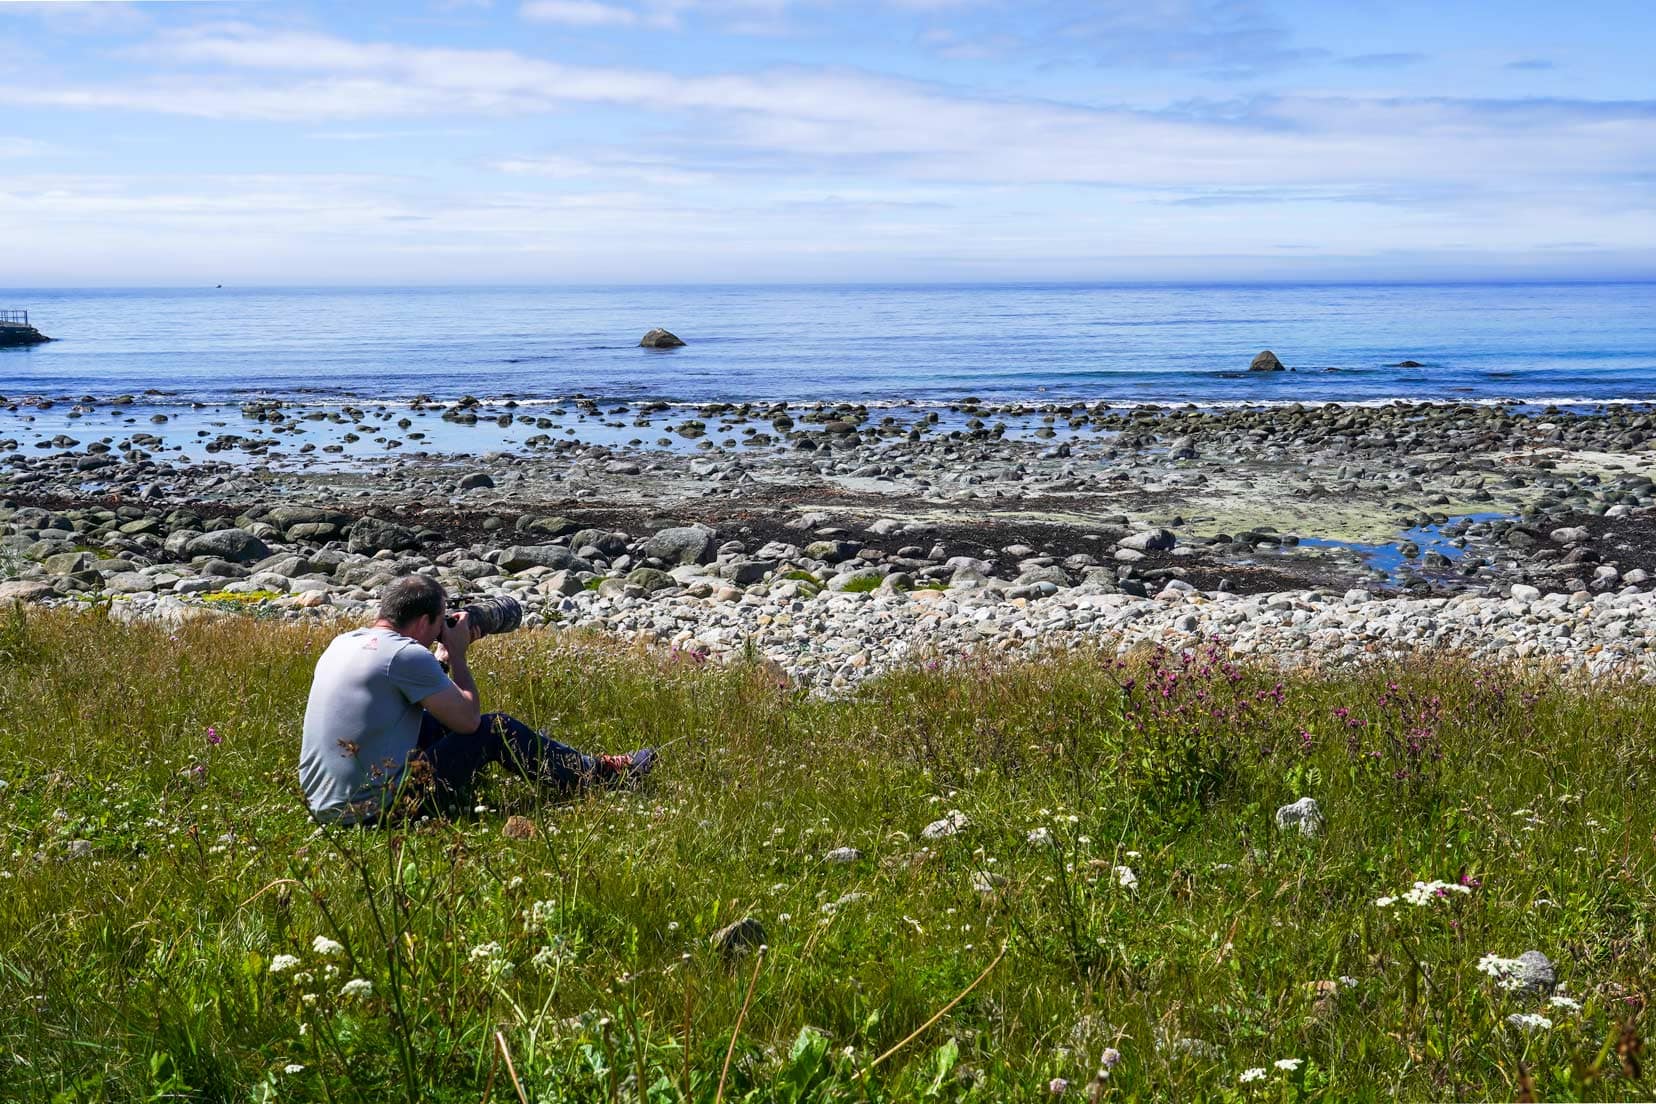 Lars sat taking photos on the shore surrounded by wildflowers and then a pebbly beach and ocean